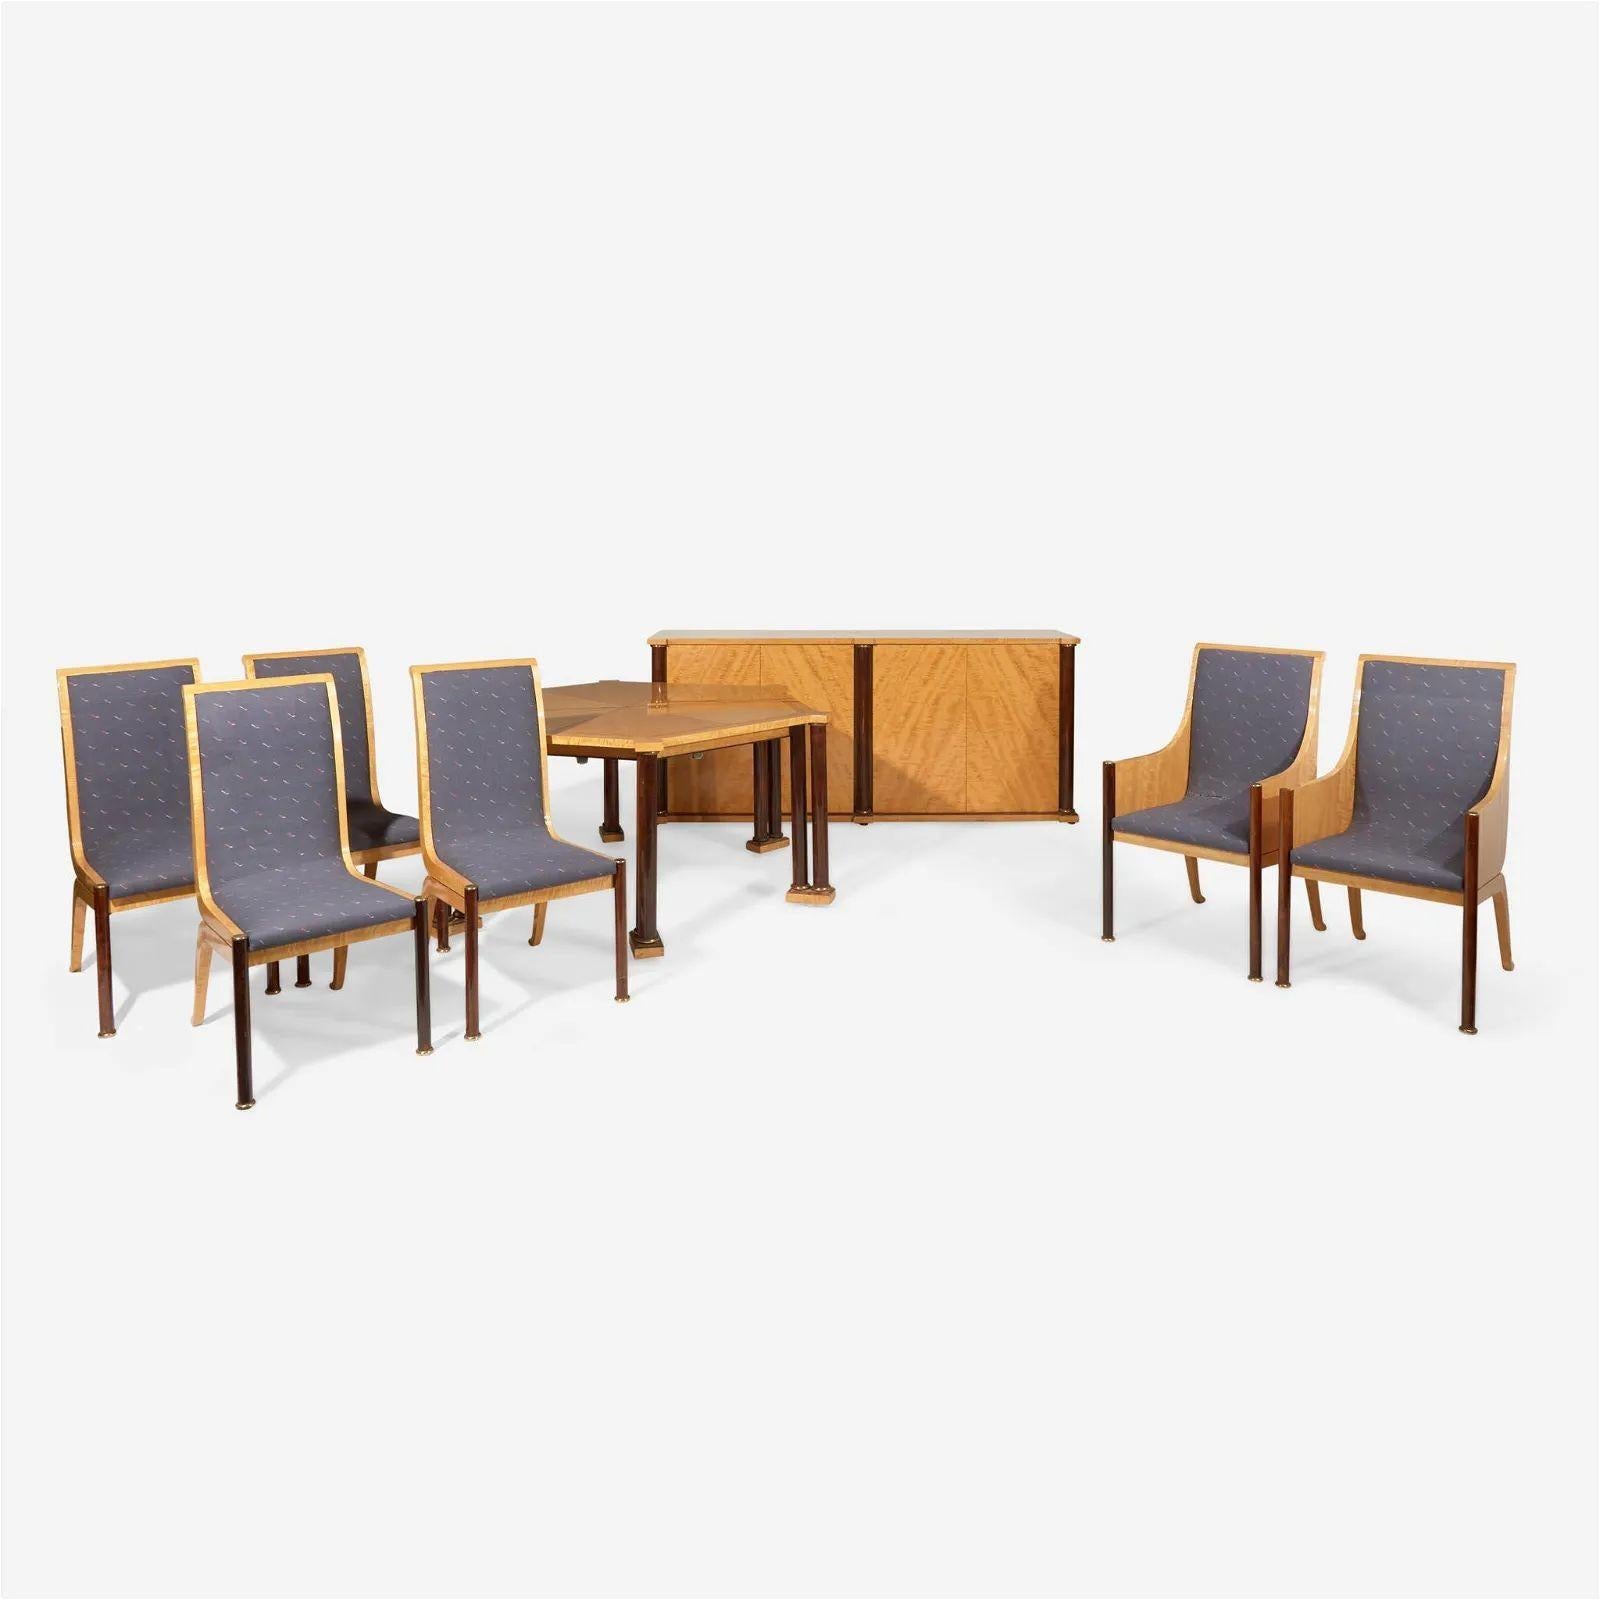 Vladimir Kagan (American, 1927-2016) The Kagan Family Copeland Dining Room Set, Vladimir Kagan Designs, Inc., USA, circa 1983

Can purchase separately

Birdseye maple veneer, mahogany, brass, fabric upholstery comprising of a dining table with two